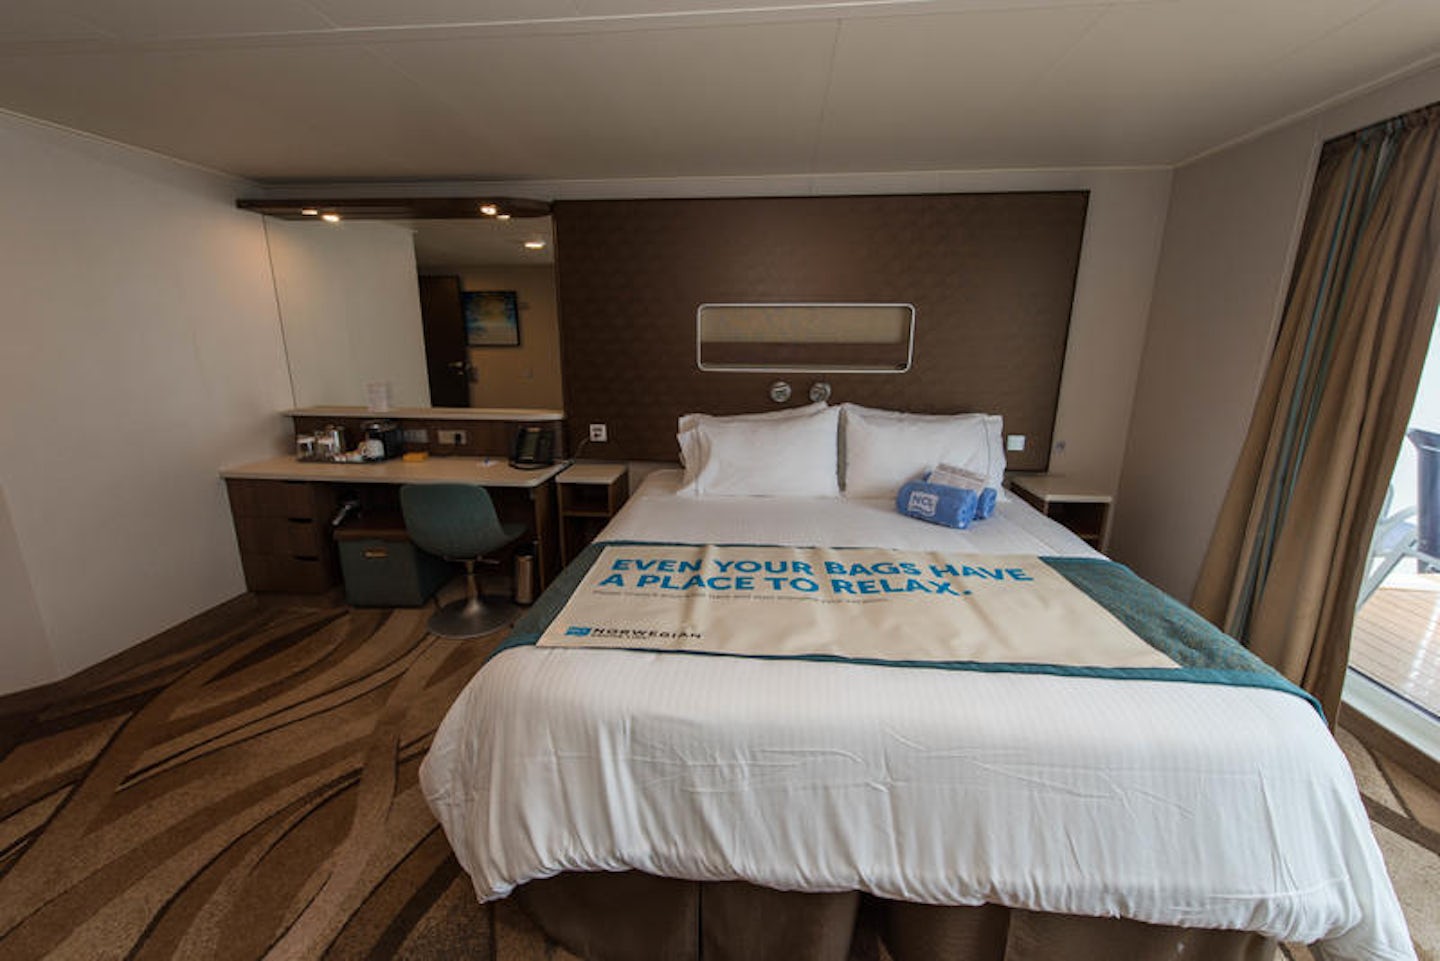 The Accessible Balcony Cabin on Norwegian Escape